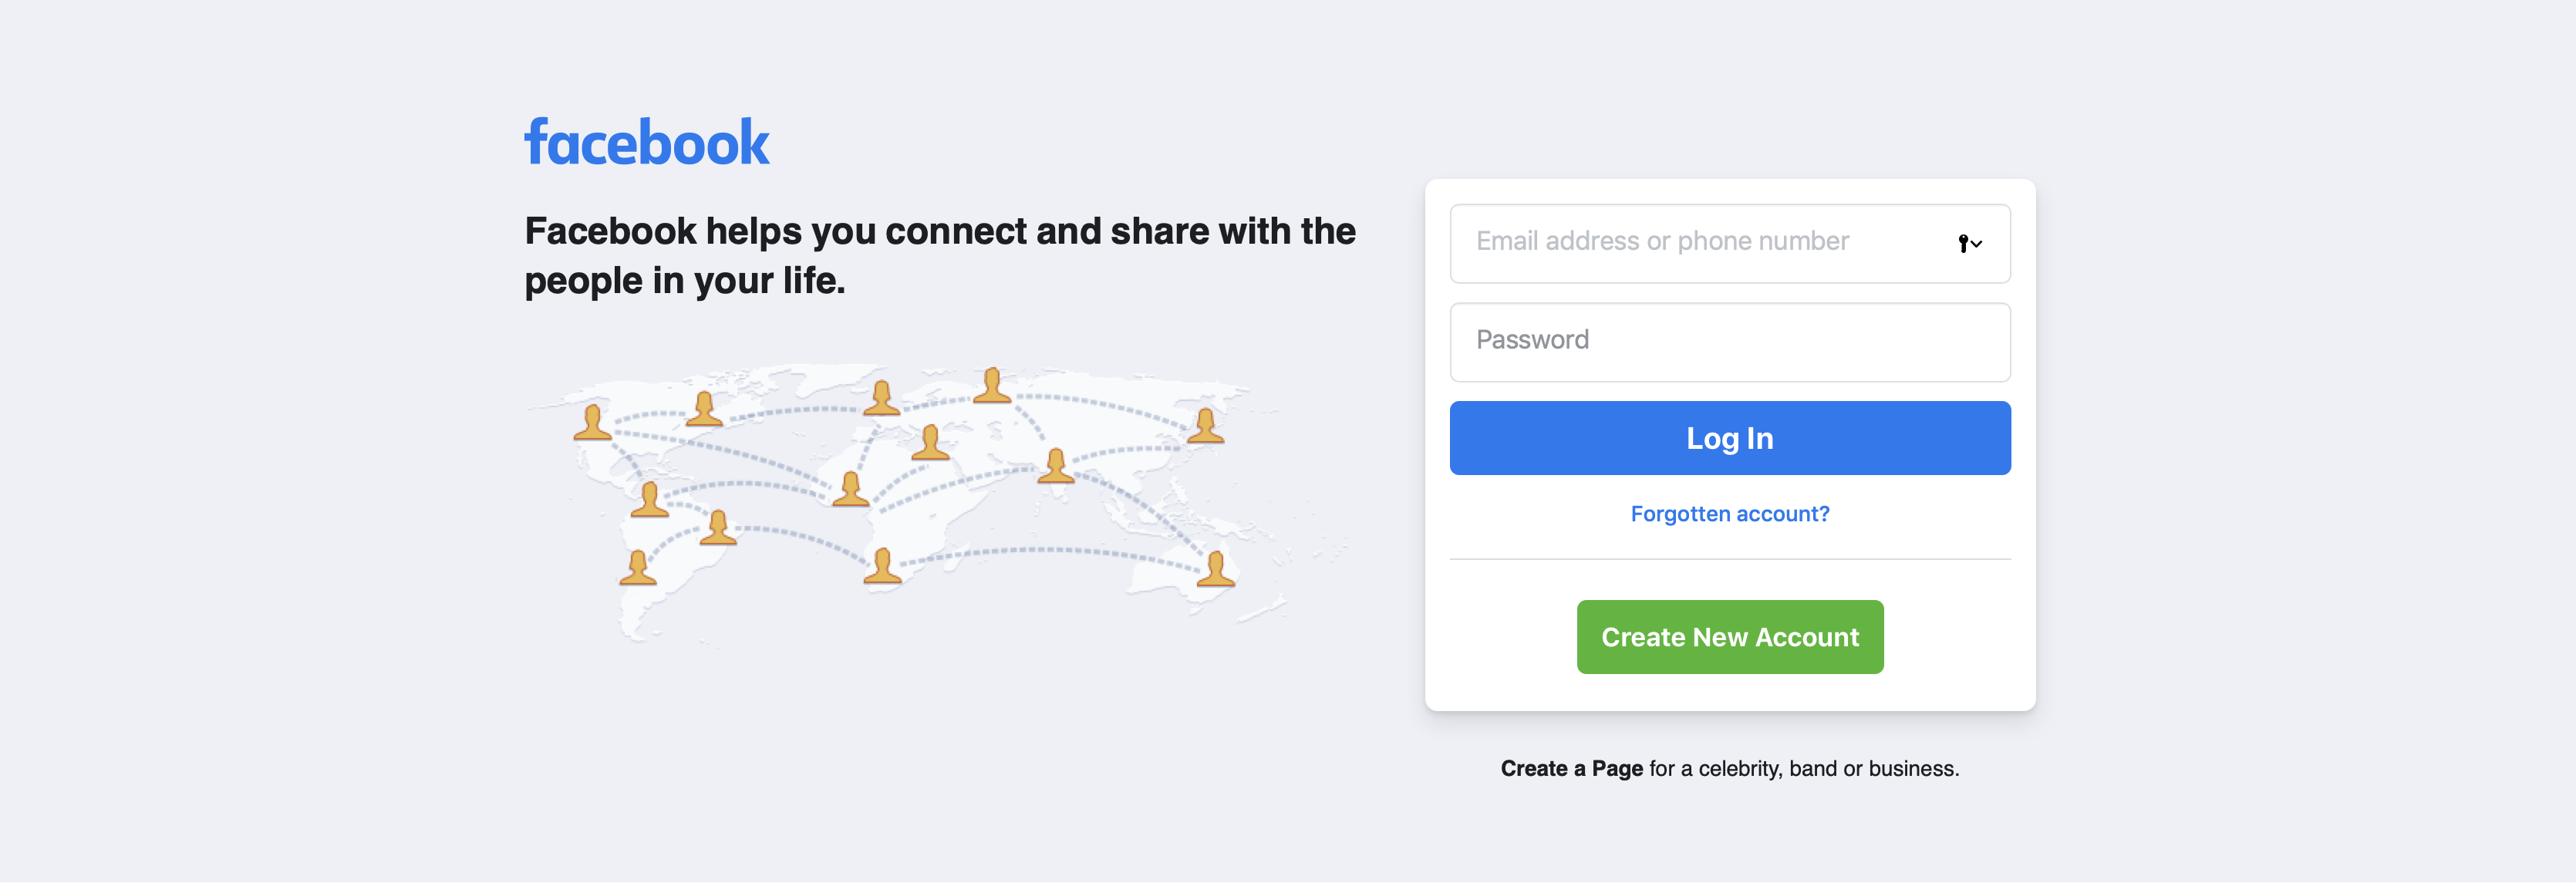 Integrate Facebook Login For Ios Using Swift And Xcode Weps Tech